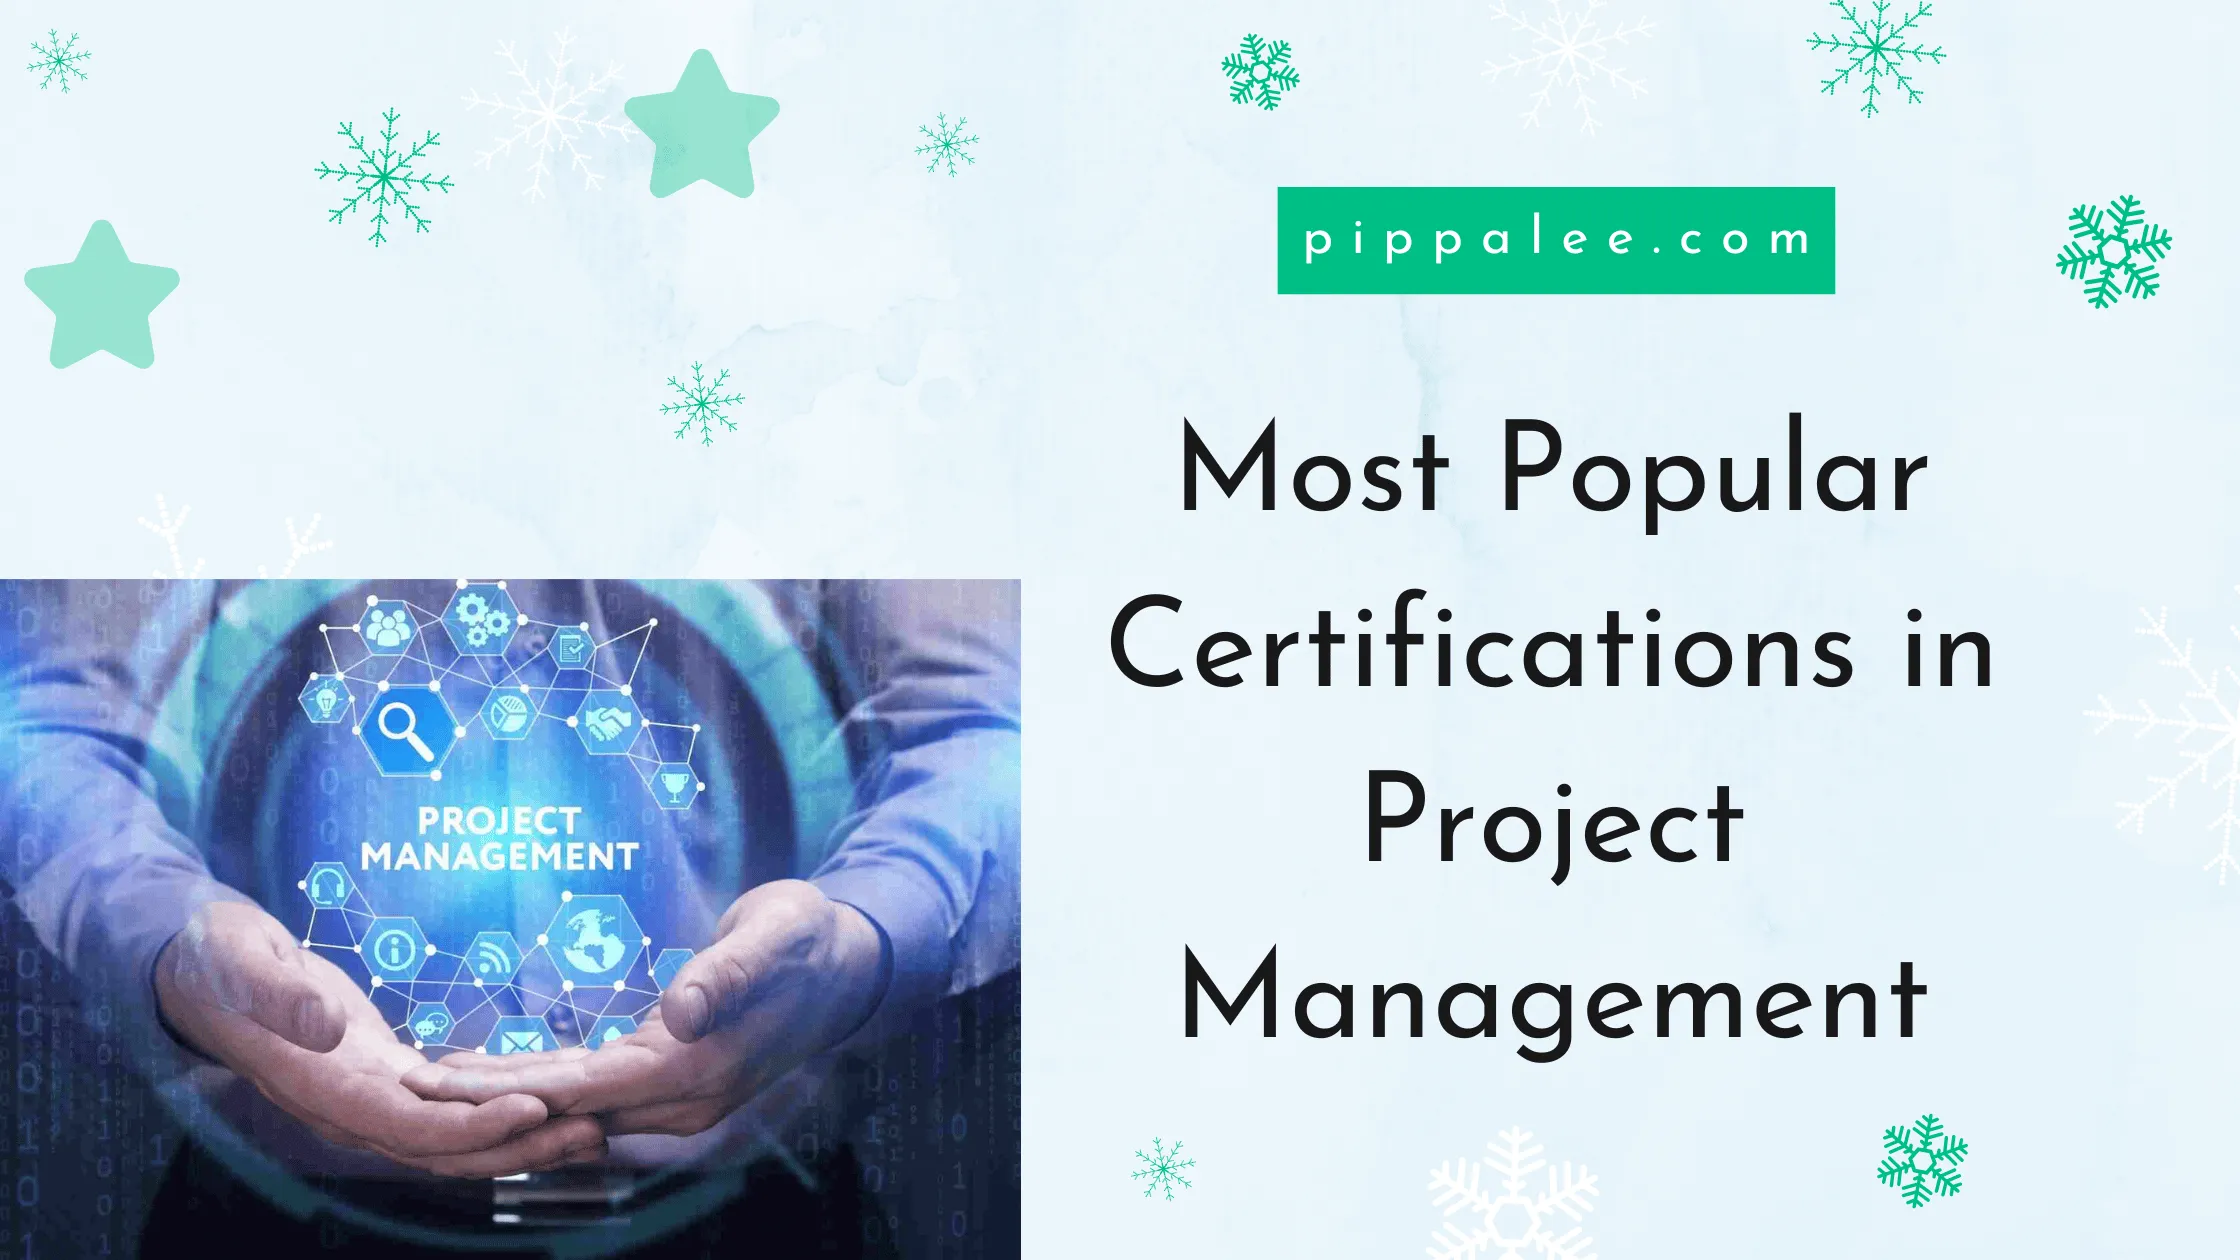 Most Popular Certifications in Project Management